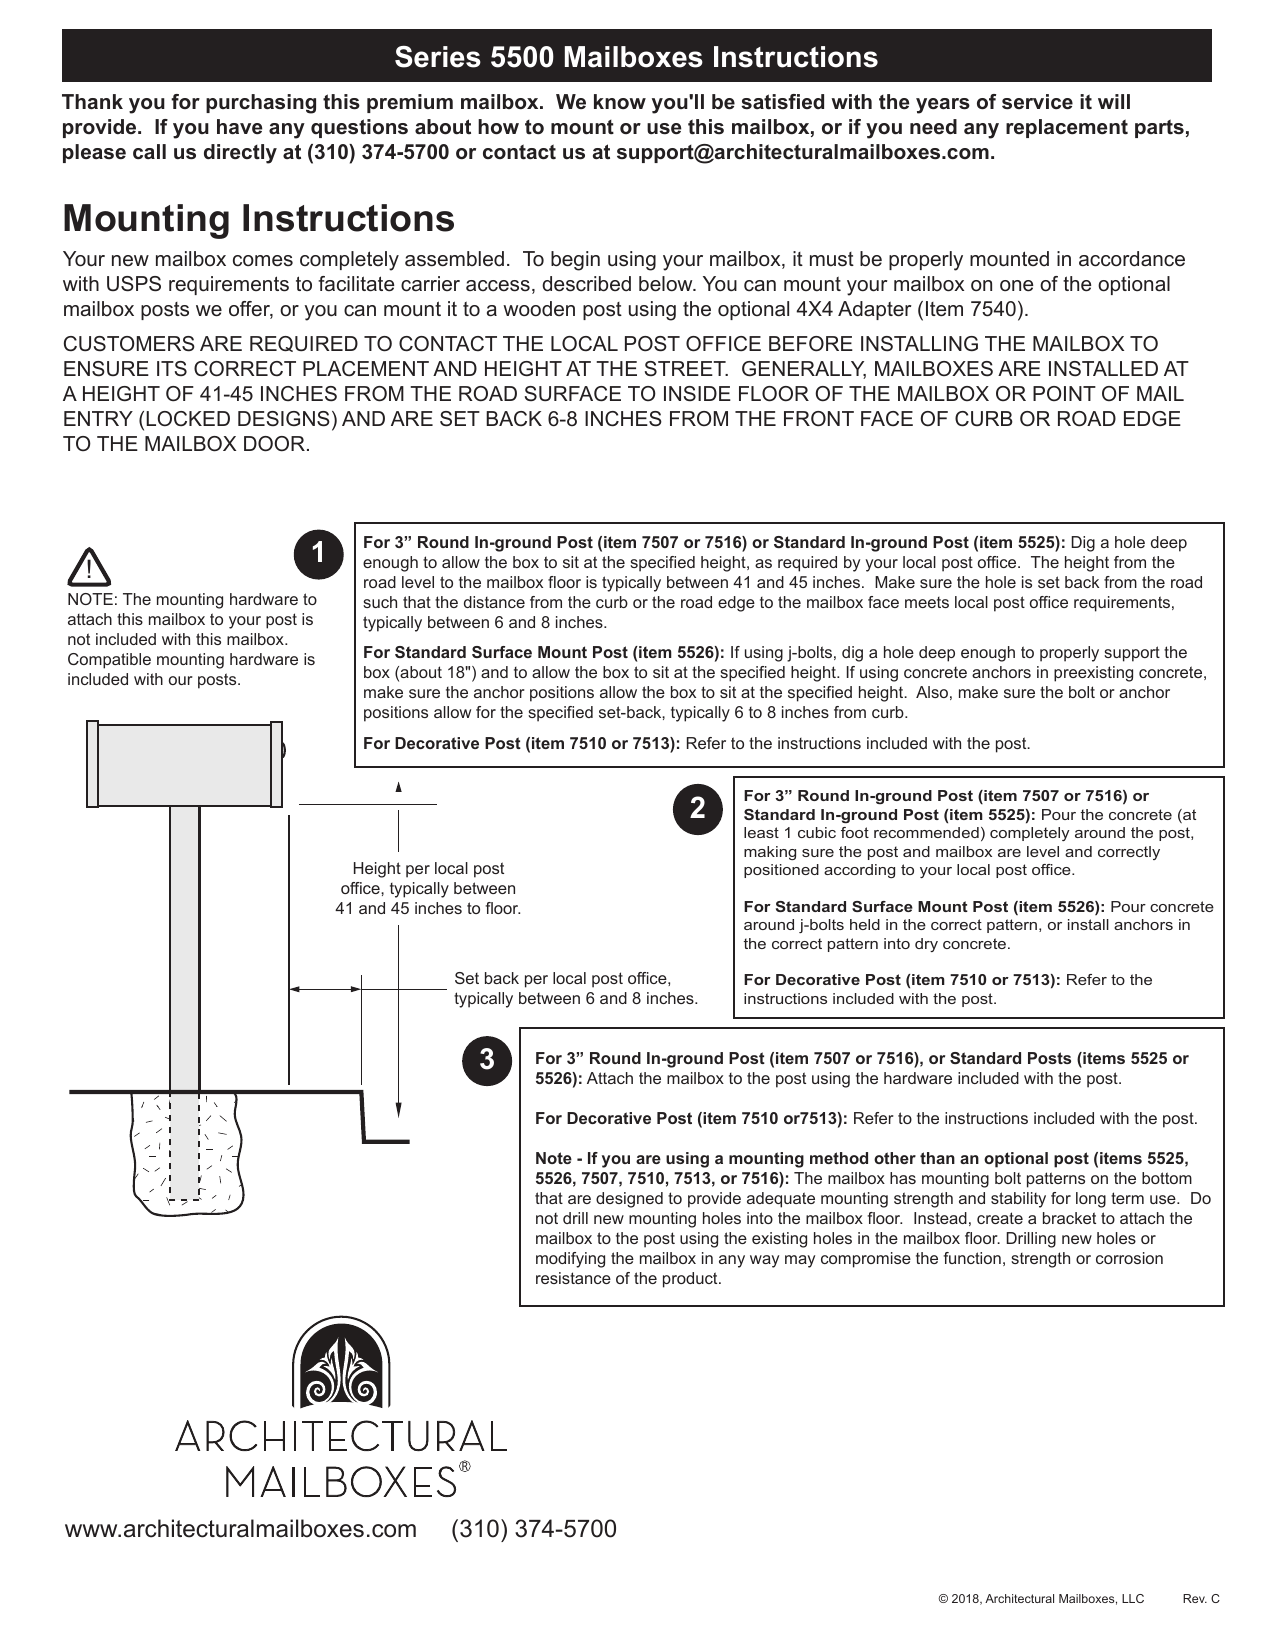 Architectural Mailboxes 5560w R 10 Sequoia White Heavy Duty Post Mount Mailbox Installation Guide Manualzz